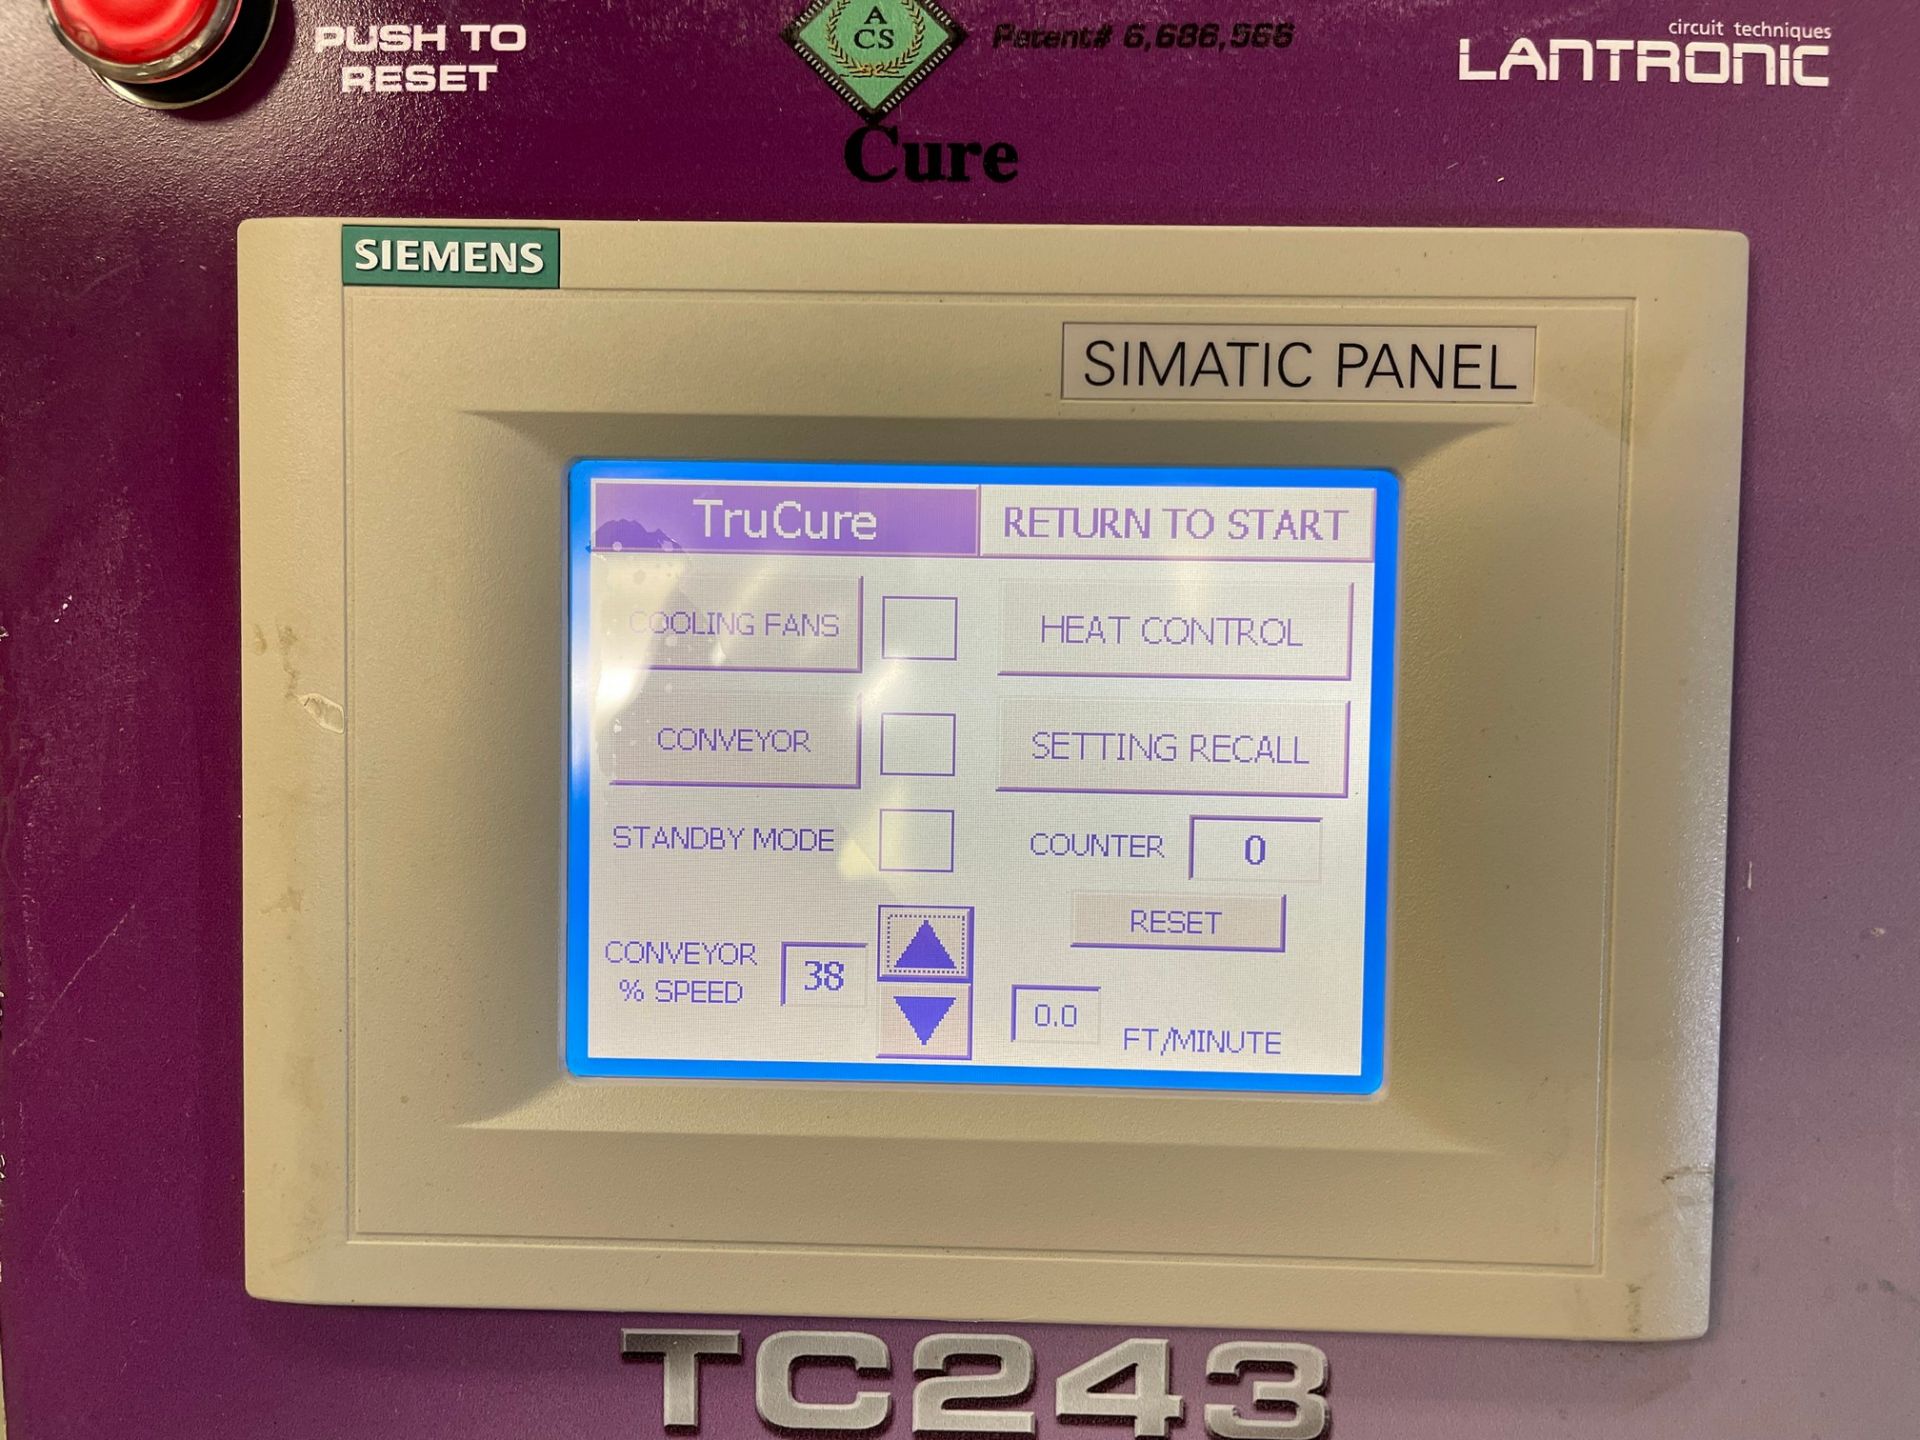 2006 LANTRONIC MODEL TC243 CURING OVEN W/ SIEMENS QUICK PANEL JR. TOUCH SCREEN CONTROL - Image 2 of 16